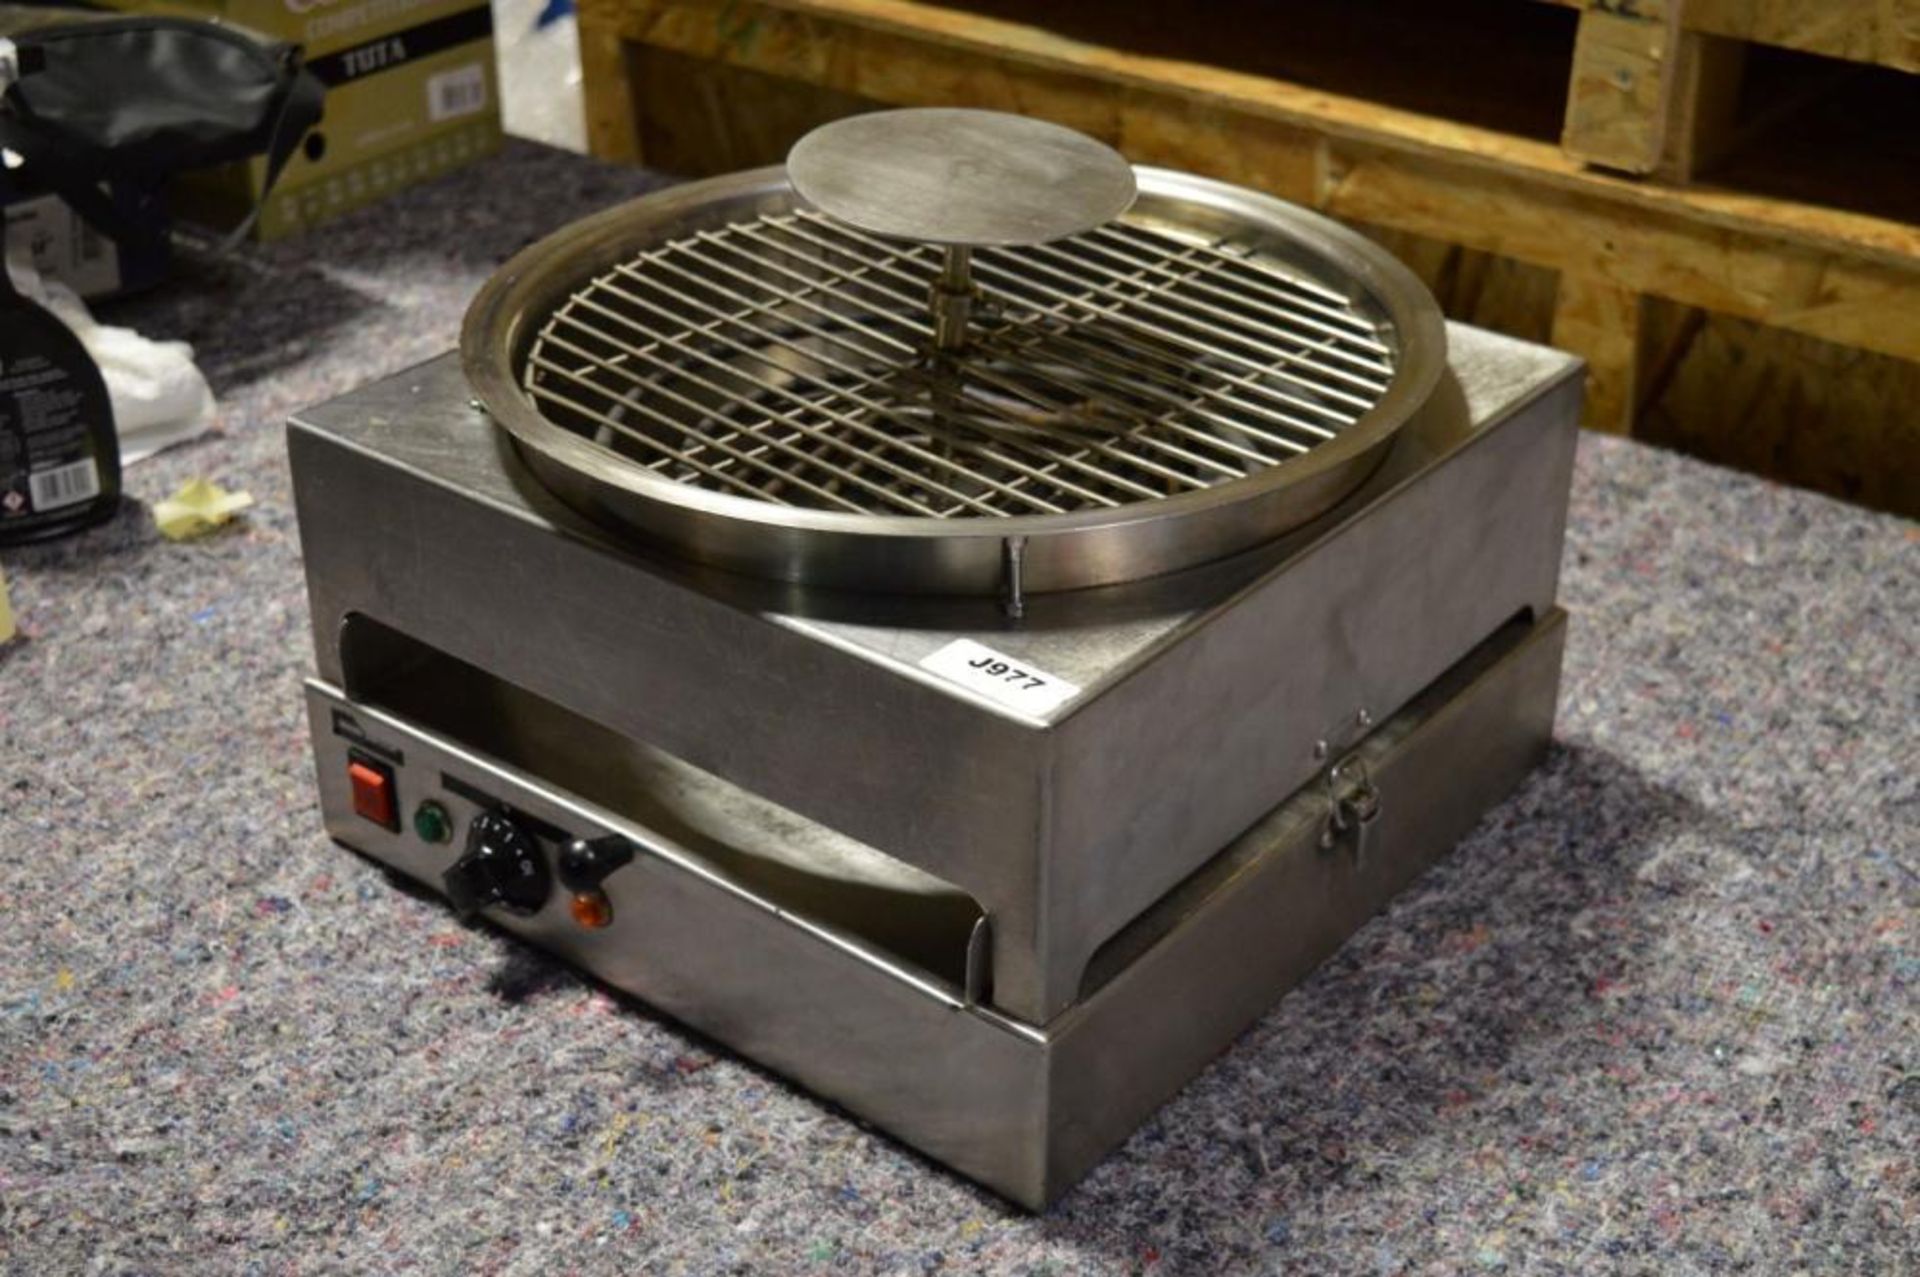 1 x Mantle Countertop Pizza Capper - As used in Supermarkets For Sealing In-House Pizzas - Stainless - Image 5 of 5